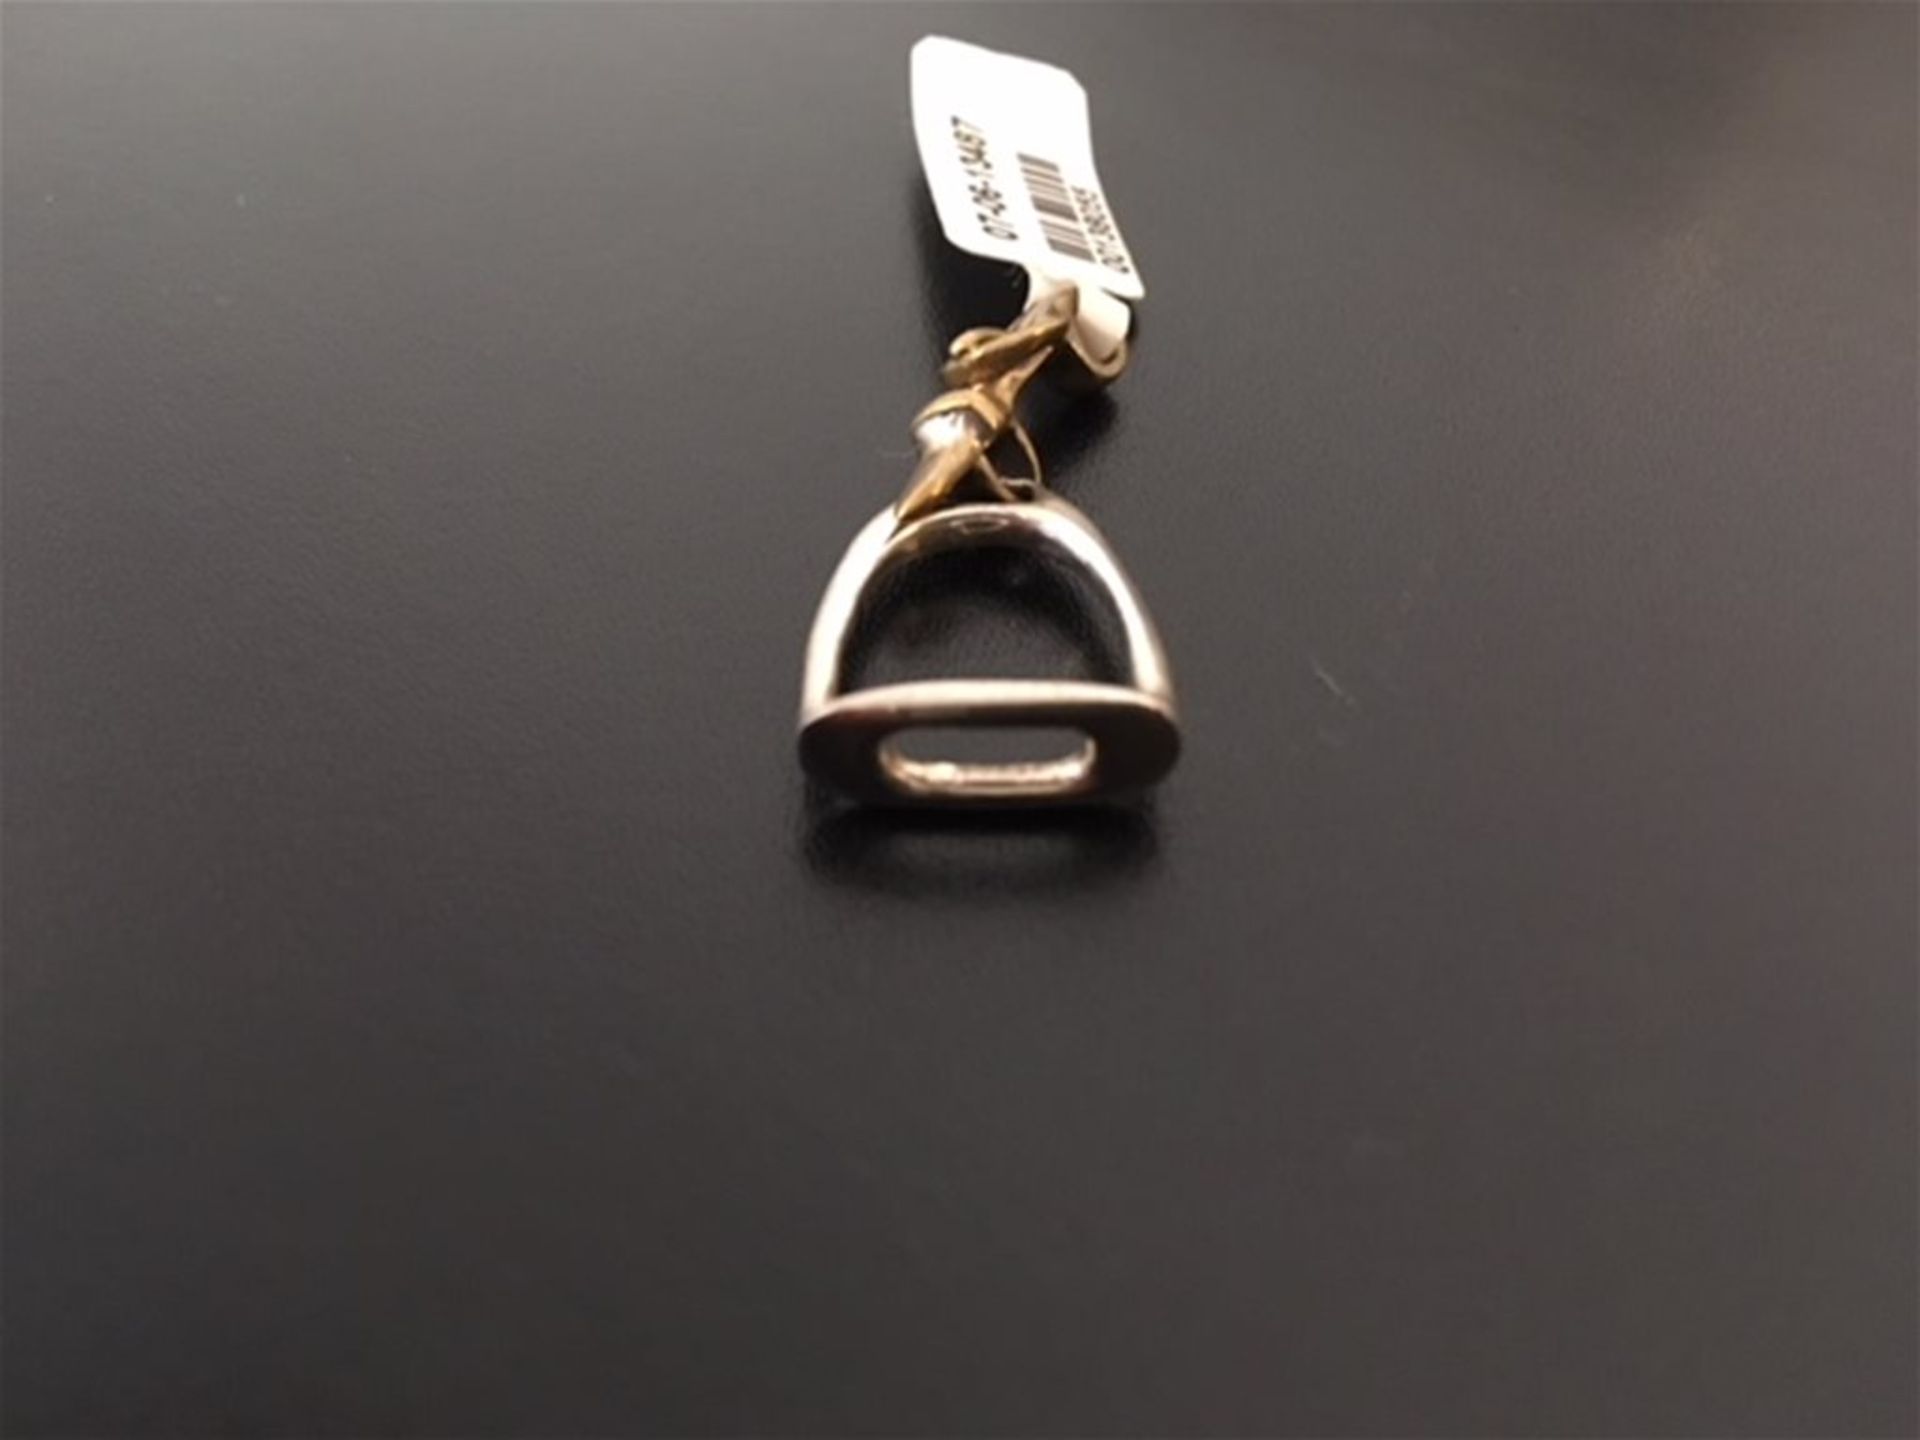 Silver & gold plated stirrup pendant - Image 2 of 2